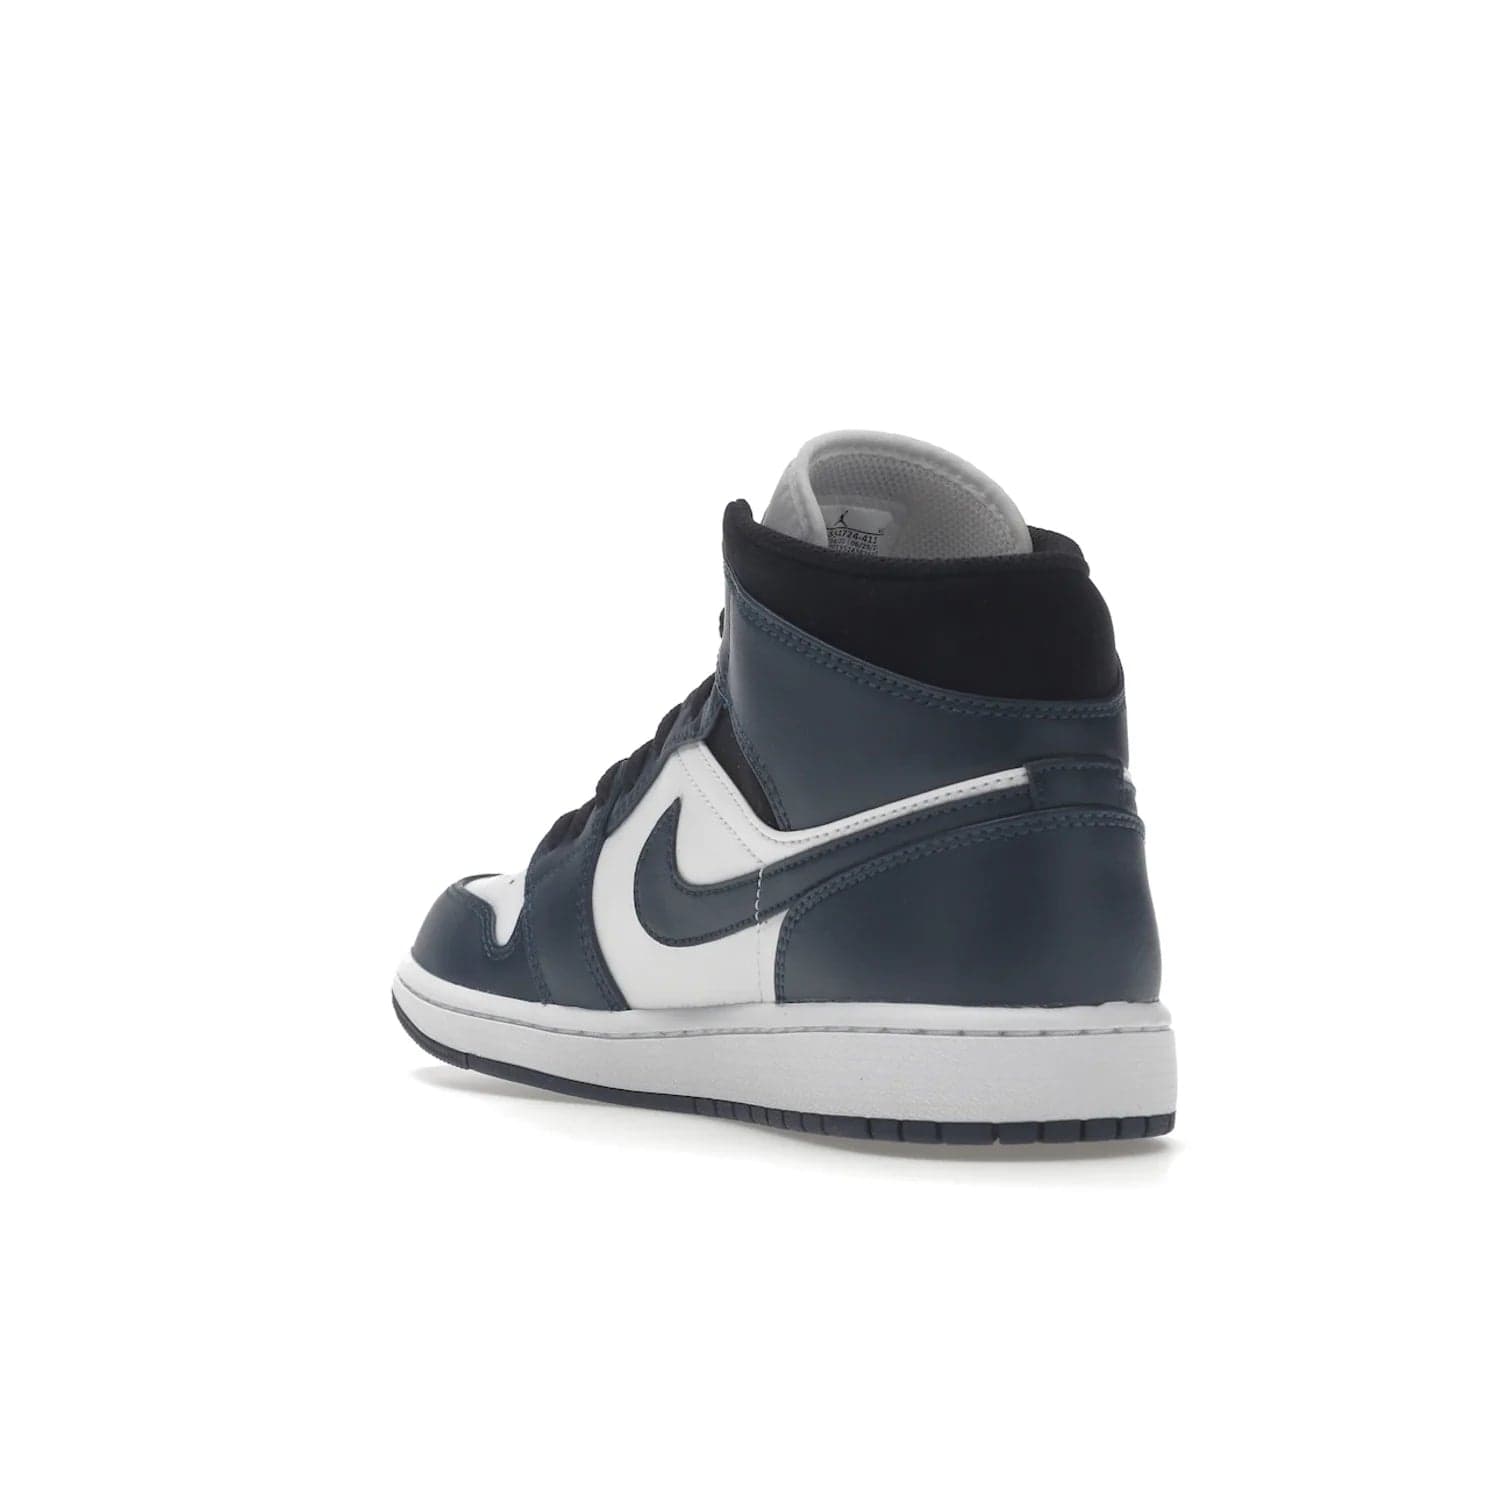 Jordan 1 Mid Armory Navy - Image 25 - Only at www.BallersClubKickz.com - The Jordan 1 Mid Armory Navy: classic basketball sneaker with soft white leather upper, deep navy blue overlays, and black leather ankle detailing. Iconic style with Jordan Wings logo and Jumpman label.